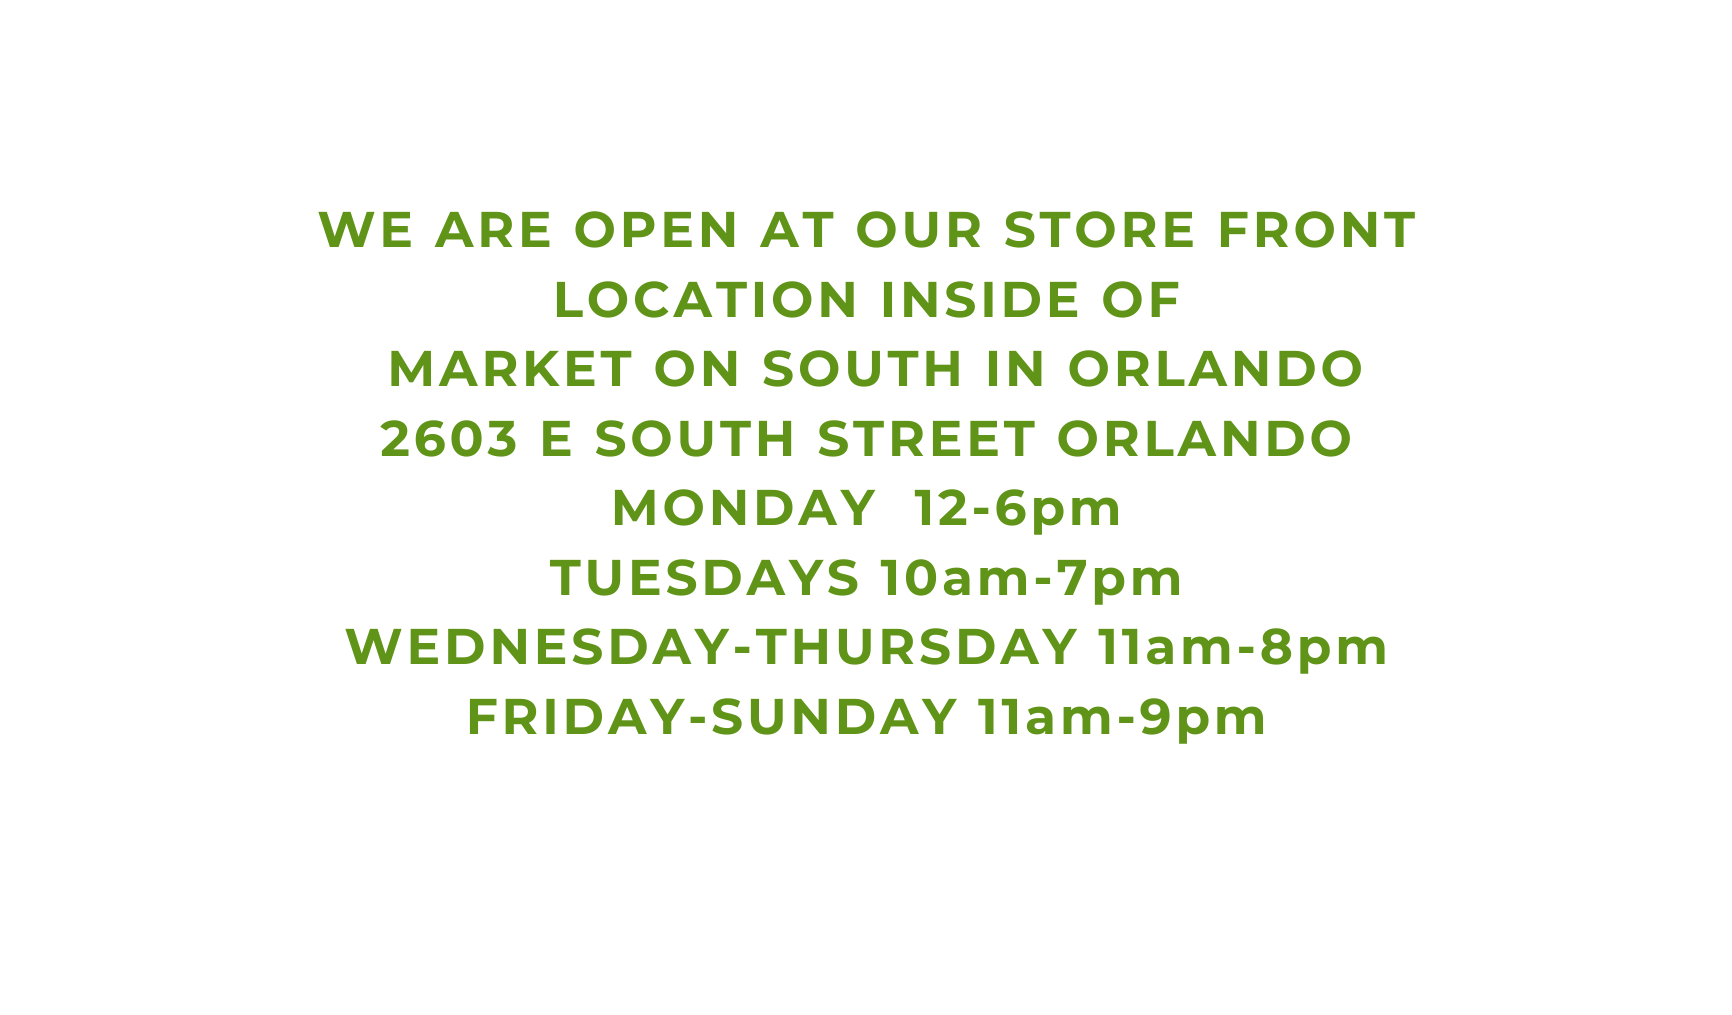 WE ARE OPEN AT OUR STORE FRONT LOCATION INSIDE OF MARKET ON SOUTH IN ORLANDO 2603 E SOUTH STREET ORLANDO MONDAY 12 6pm TUESDAYS 10am 7pm WEDNESDAY THURSDAY 11am 8pm FRIDAY SUNDAY 11am 9pm